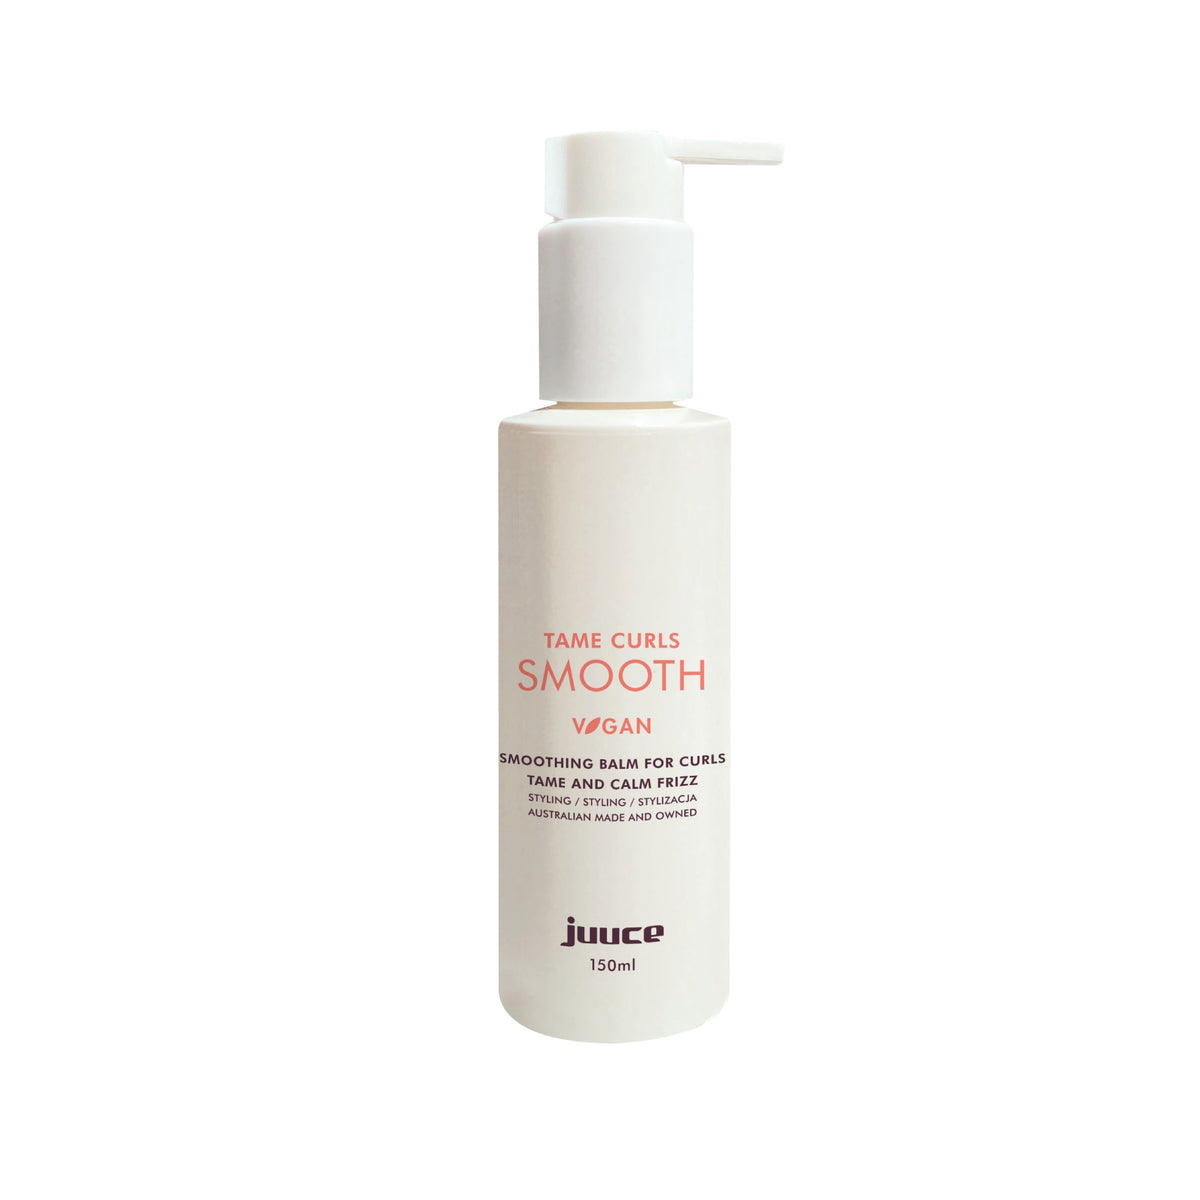 Juuce Tame Curls Smooth - Haircare Superstore